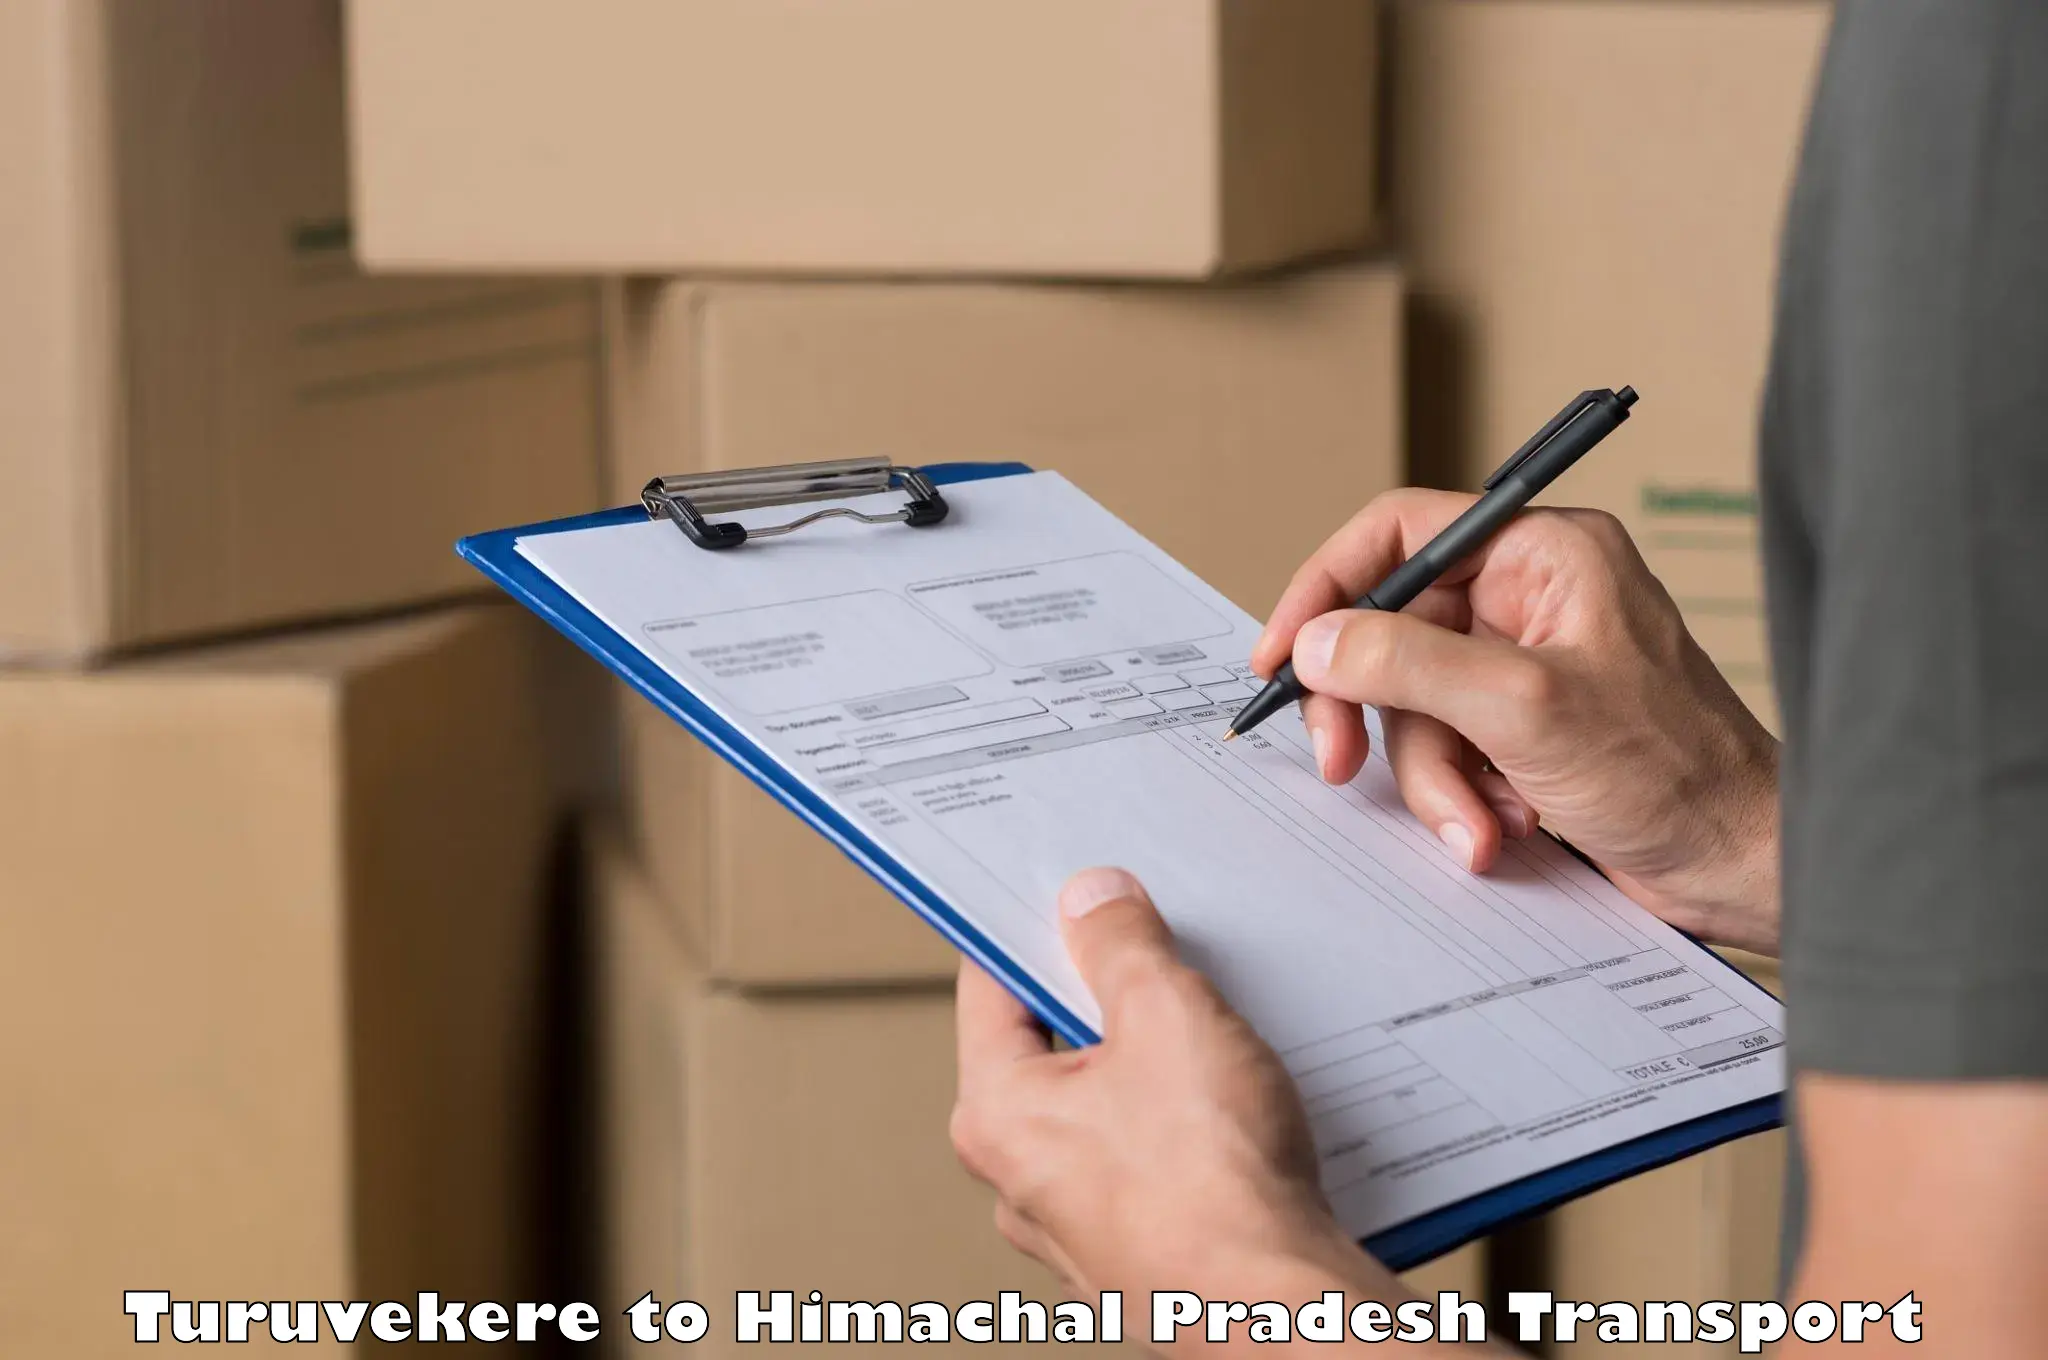 All India transport service Turuvekere to Himachal Pradesh